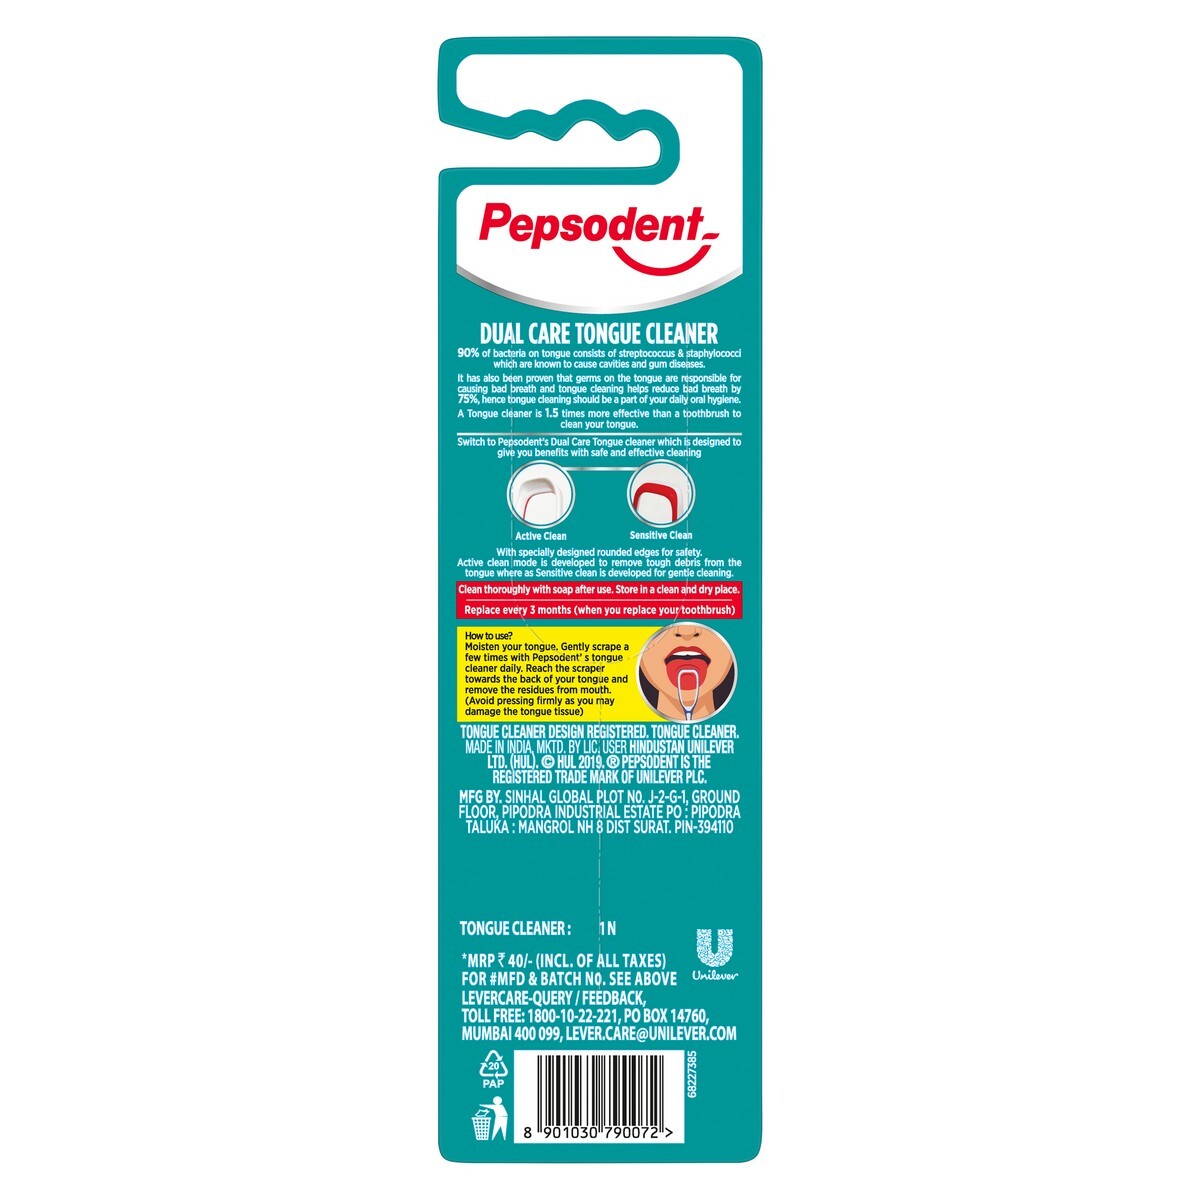 Pepsodent Dual Care Tongue Cleaner